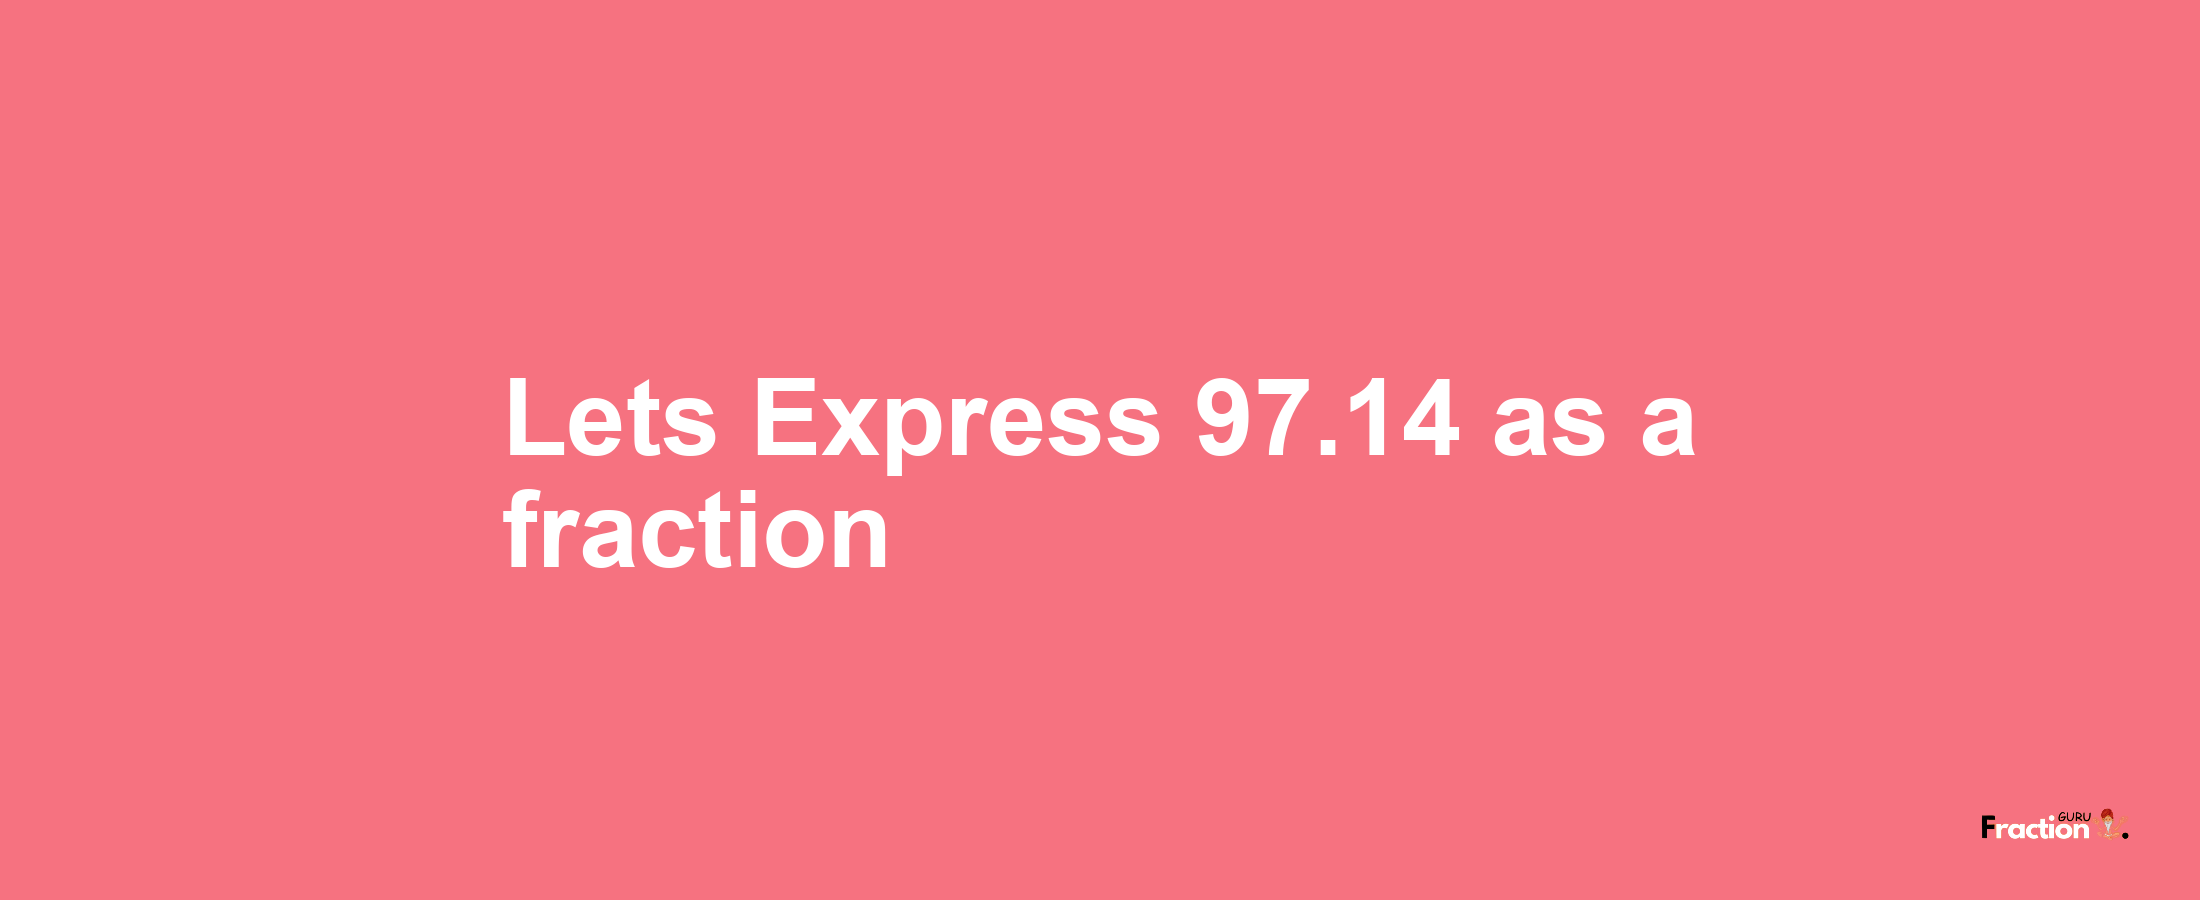 Lets Express 97.14 as afraction